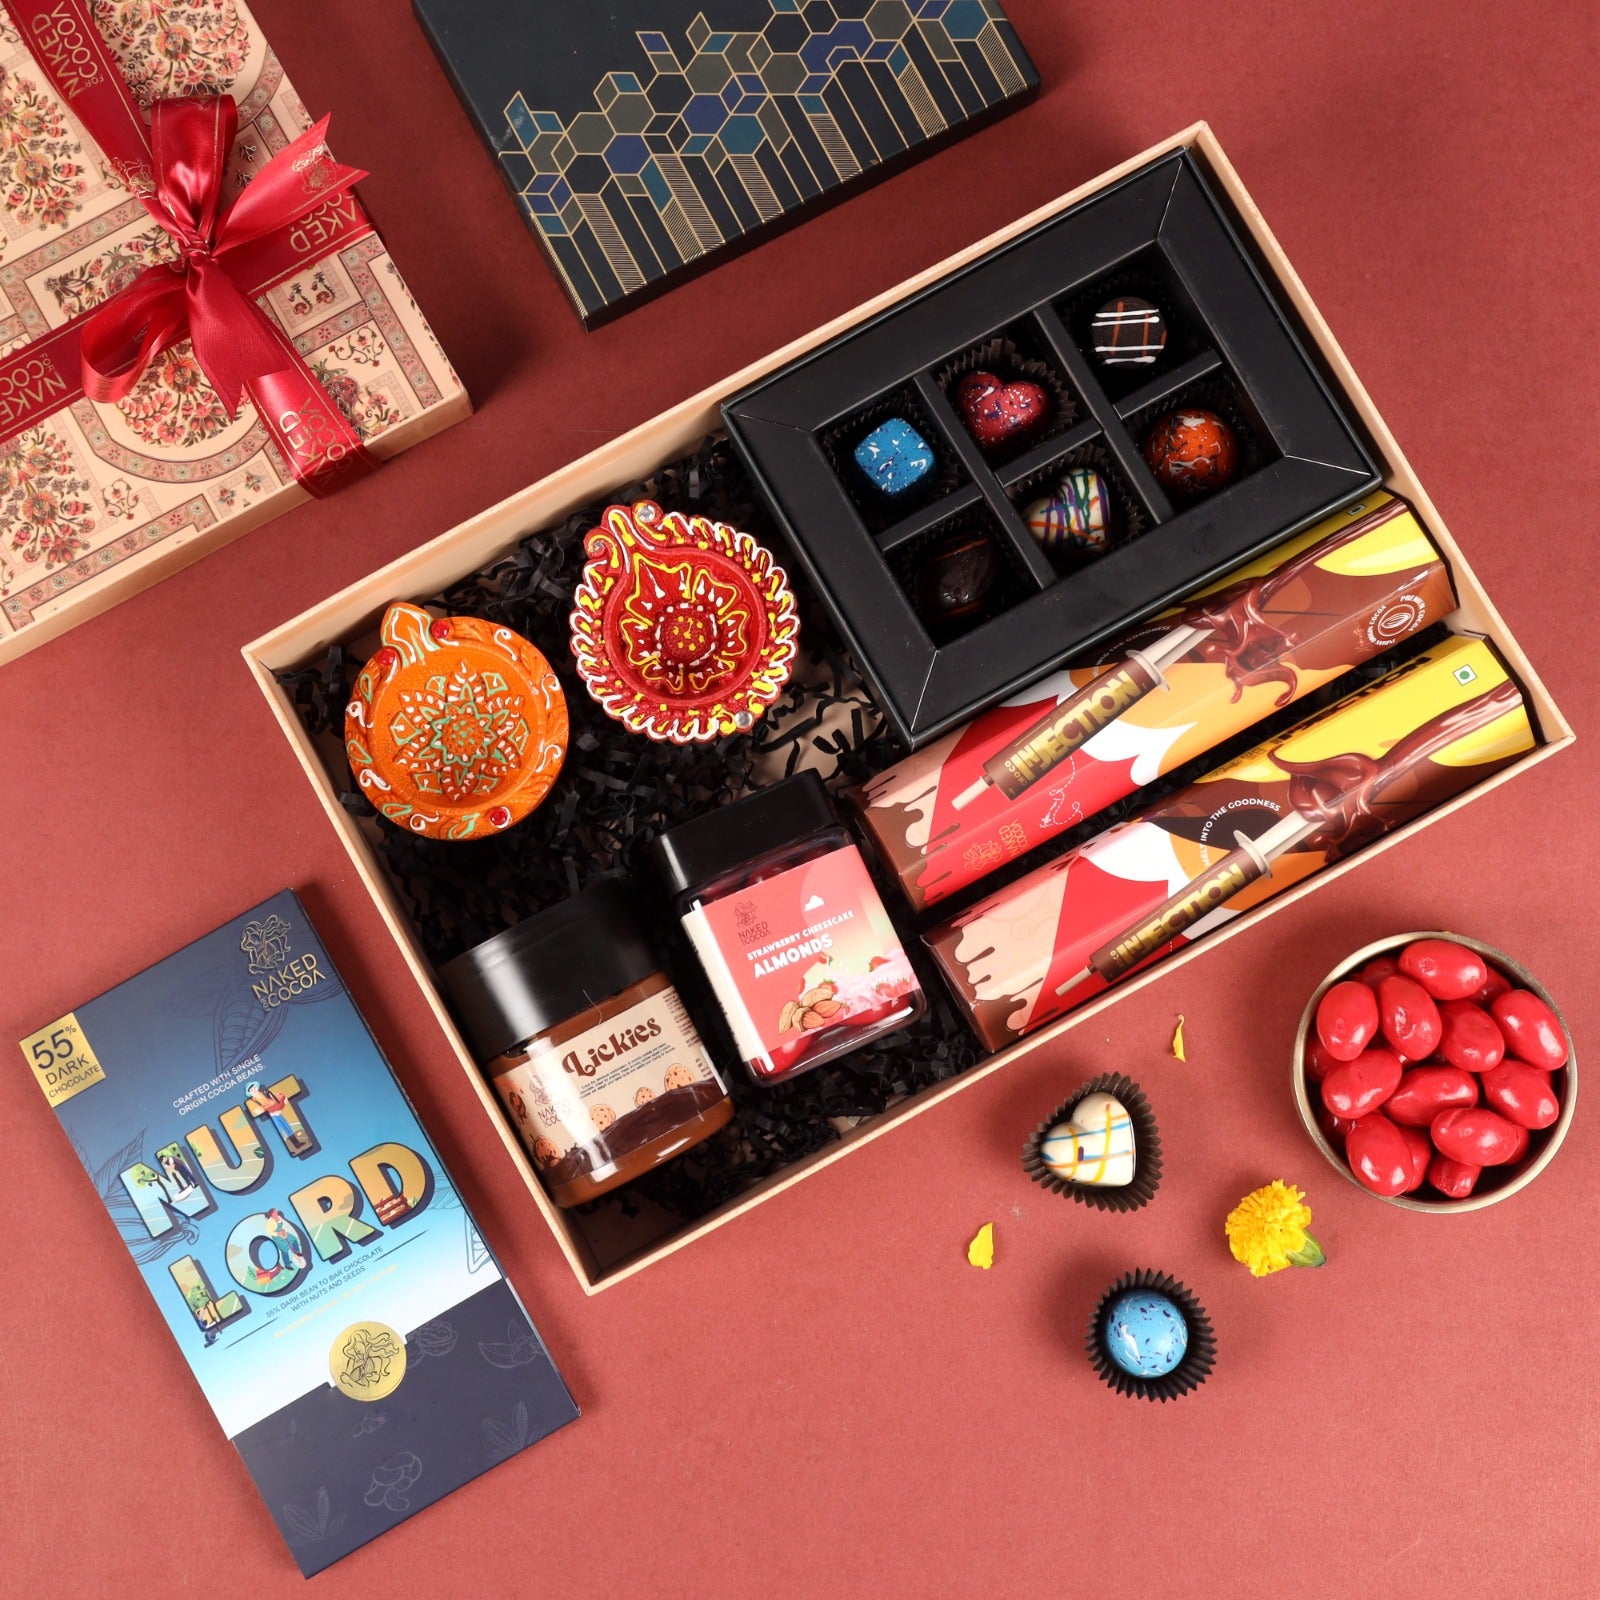 Diwali Special Gourmet Hamper - Bean to Bar Chocolate, Choco Injections, Chocolate Bon Bons, Nut Dragees, Cookie Lickies, and Handmade Diyas